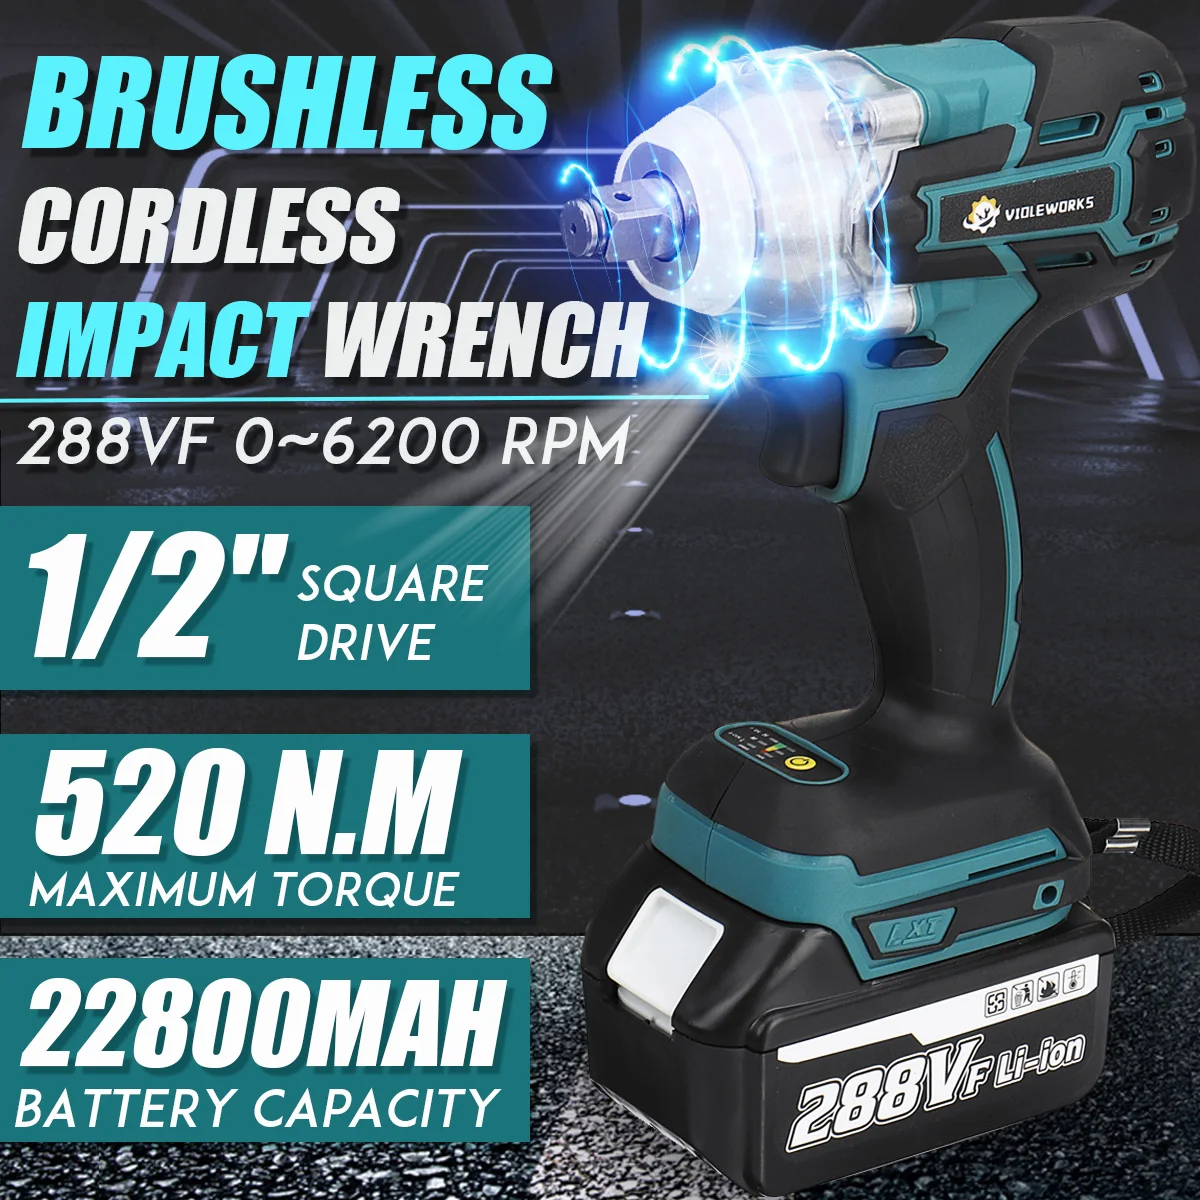 

NEW 22800mAh 288VF Brushless Electric Impact Wrench 1/2 Lithium-Ion Battery 6200rpm 520 N.M Torque 110-240V